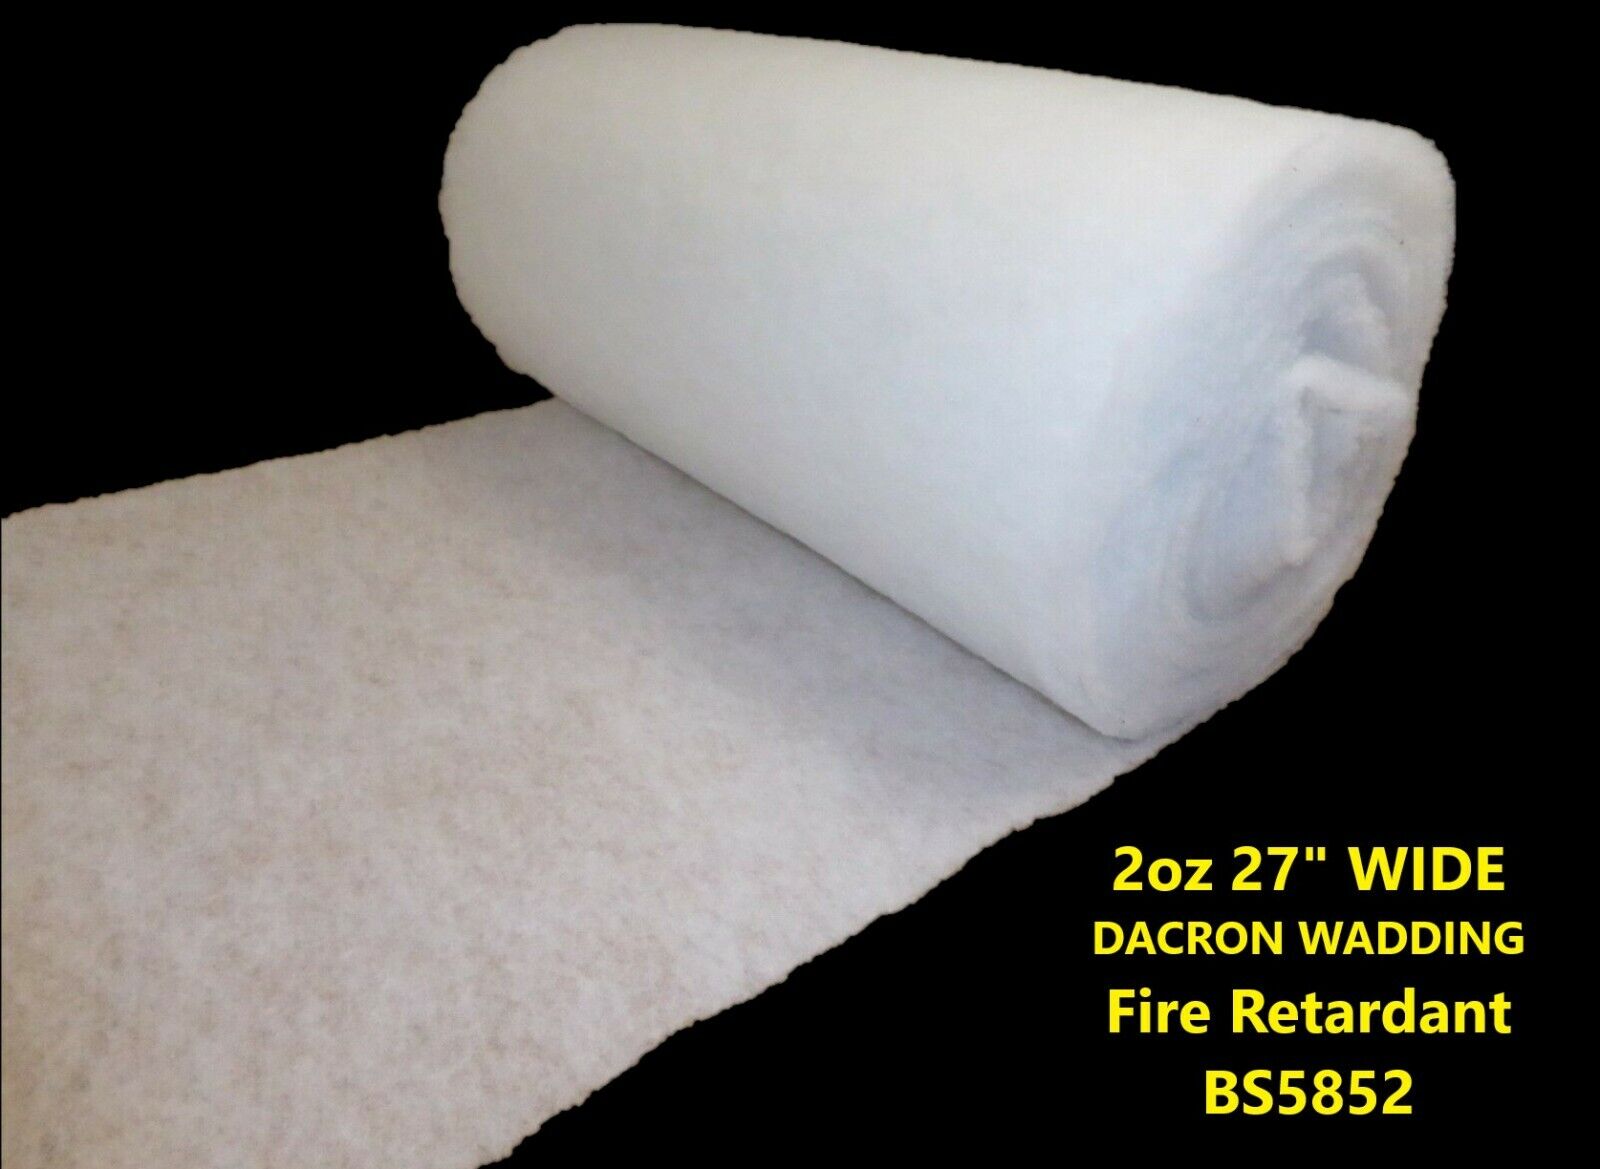 220g natural cotton polyester wadding upholstery